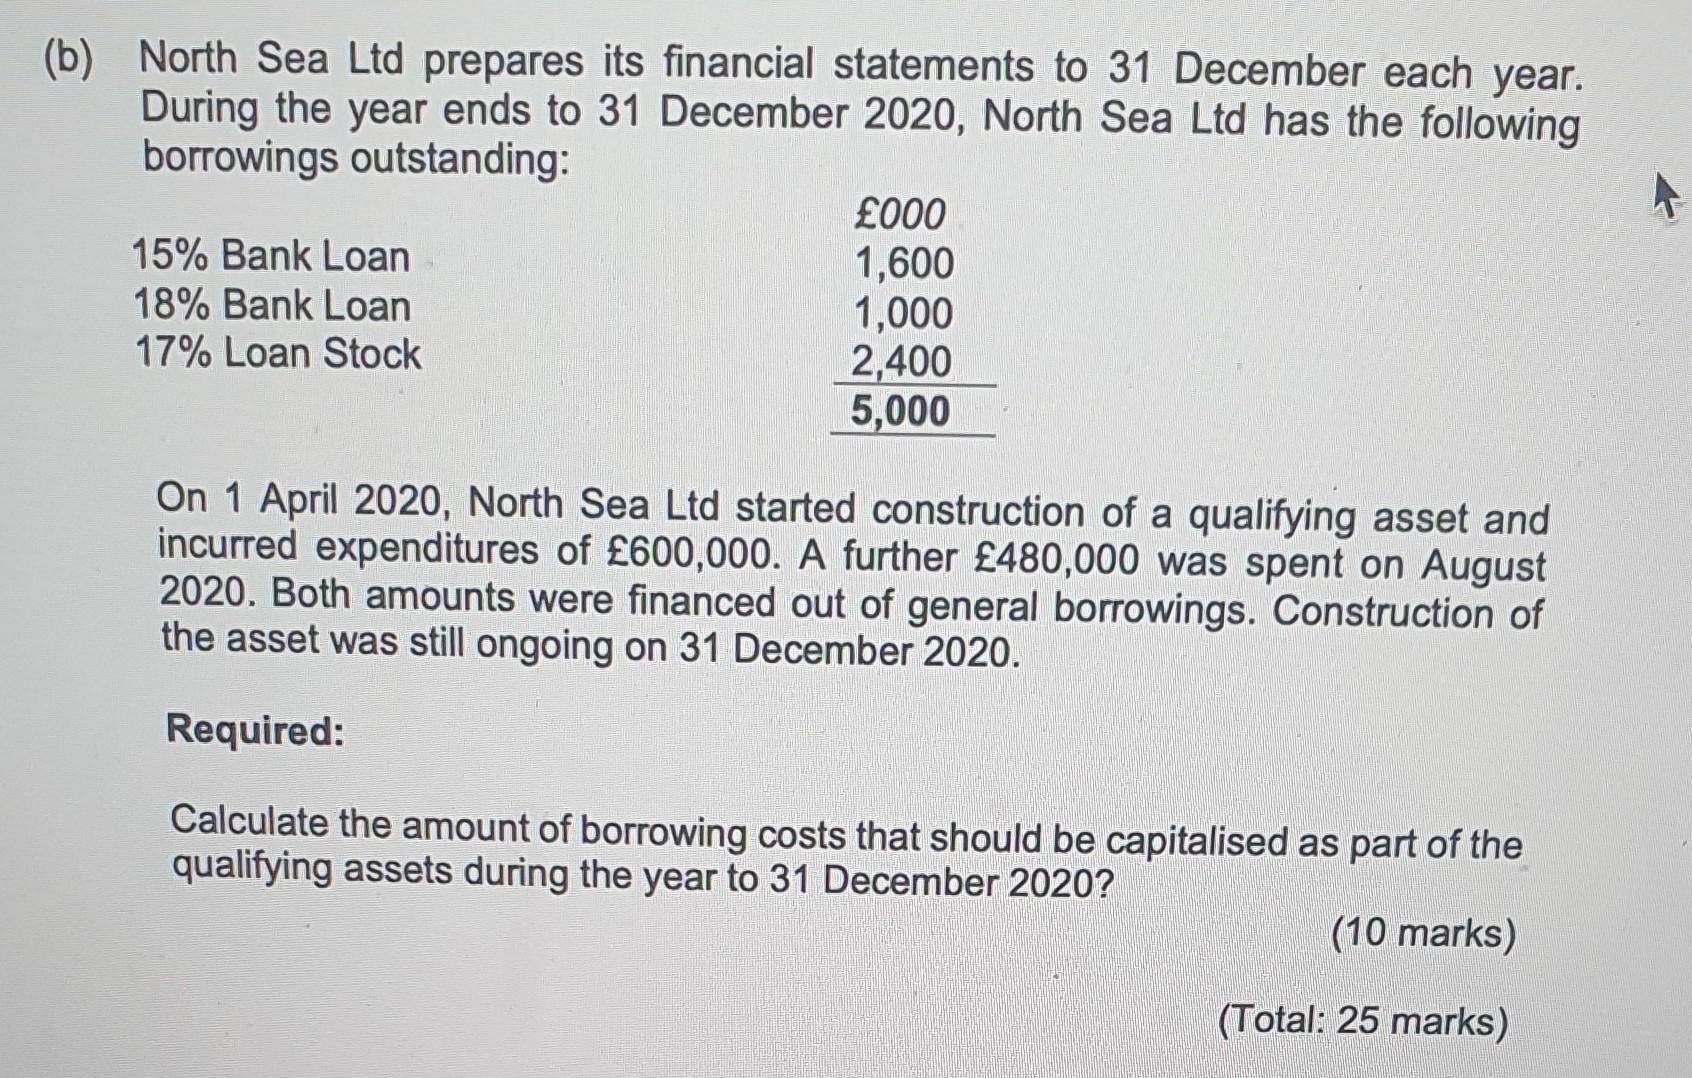 (b) North Sea Ltd prepares its financial statements to 31 December each year. During the year ends to 31 December 2020, North